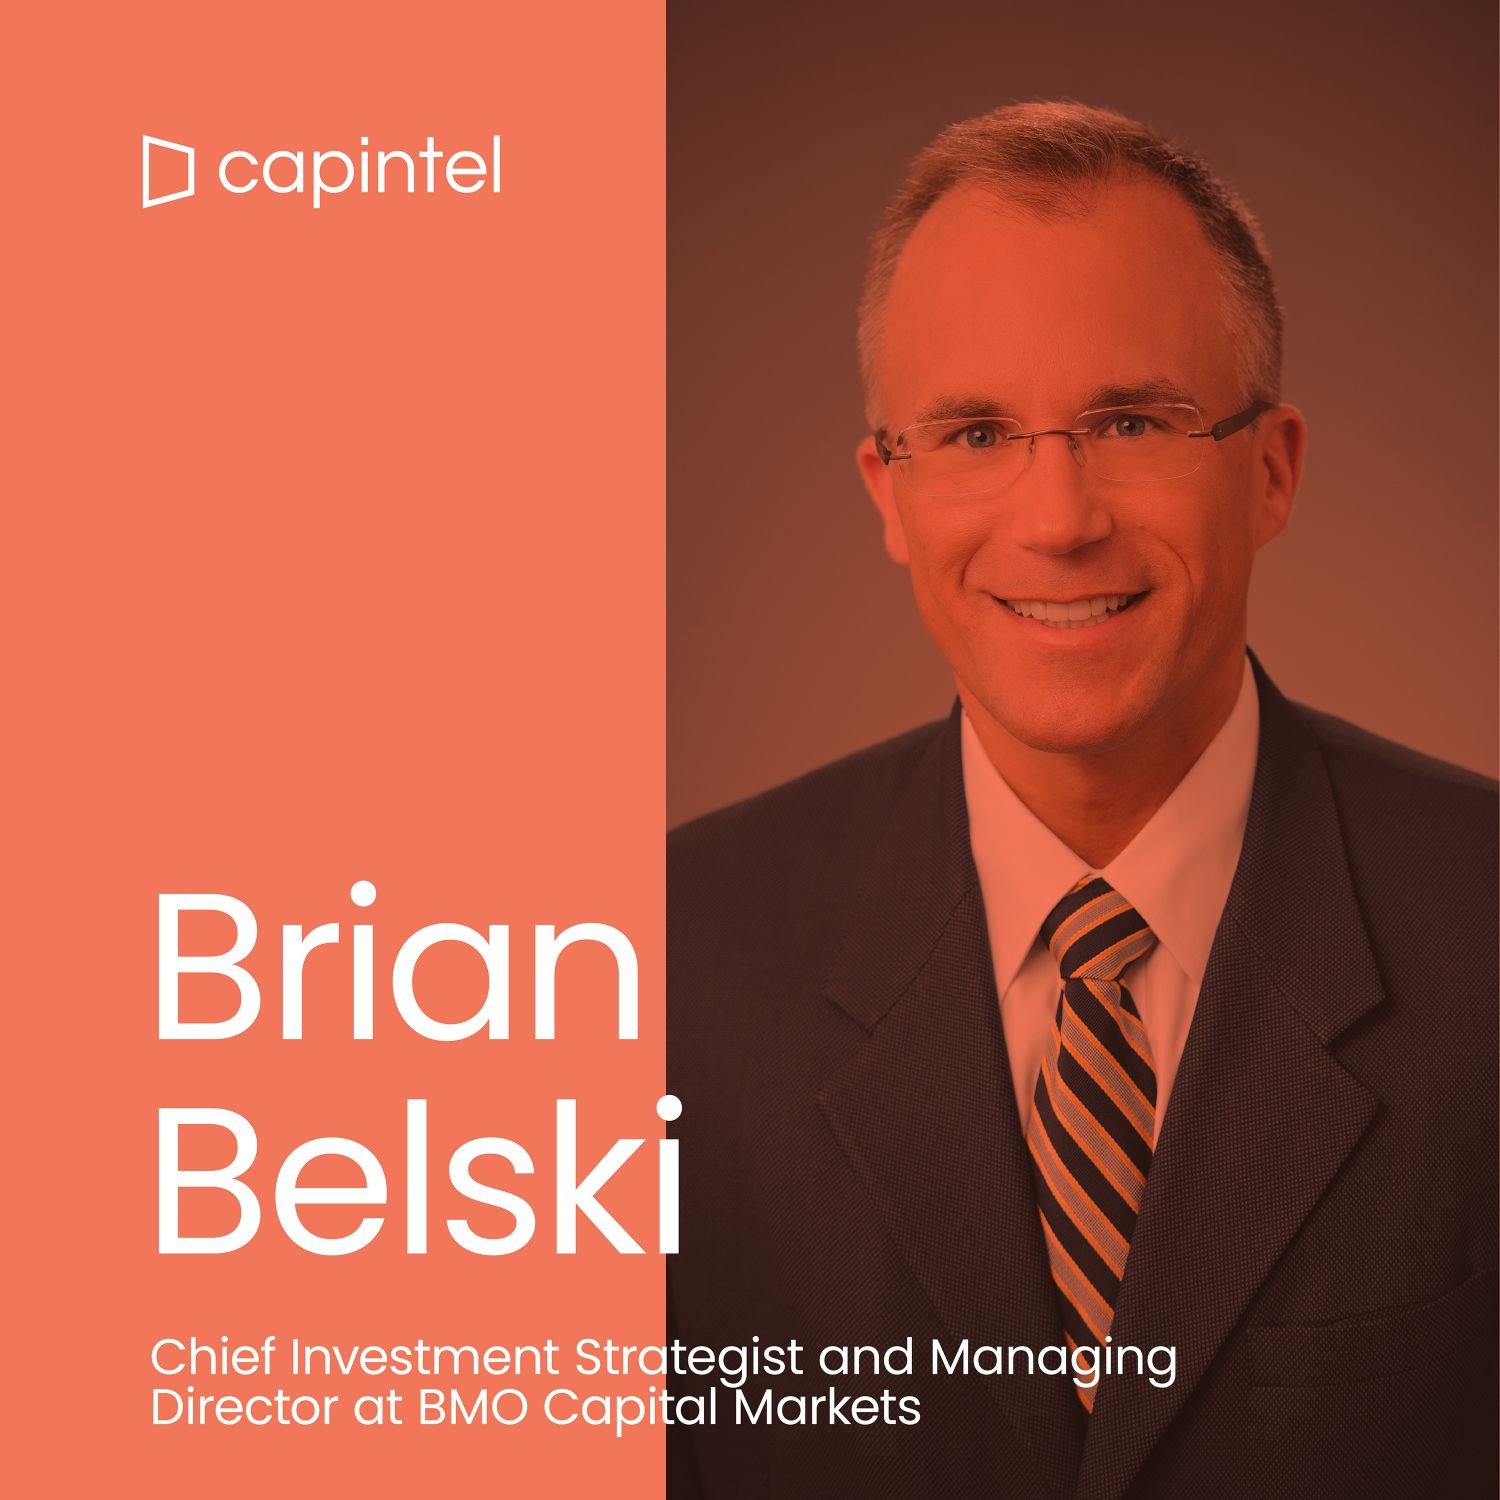 The Case for Investing in U.S. Equities, with Brian Belski and BMO Global Asset Management